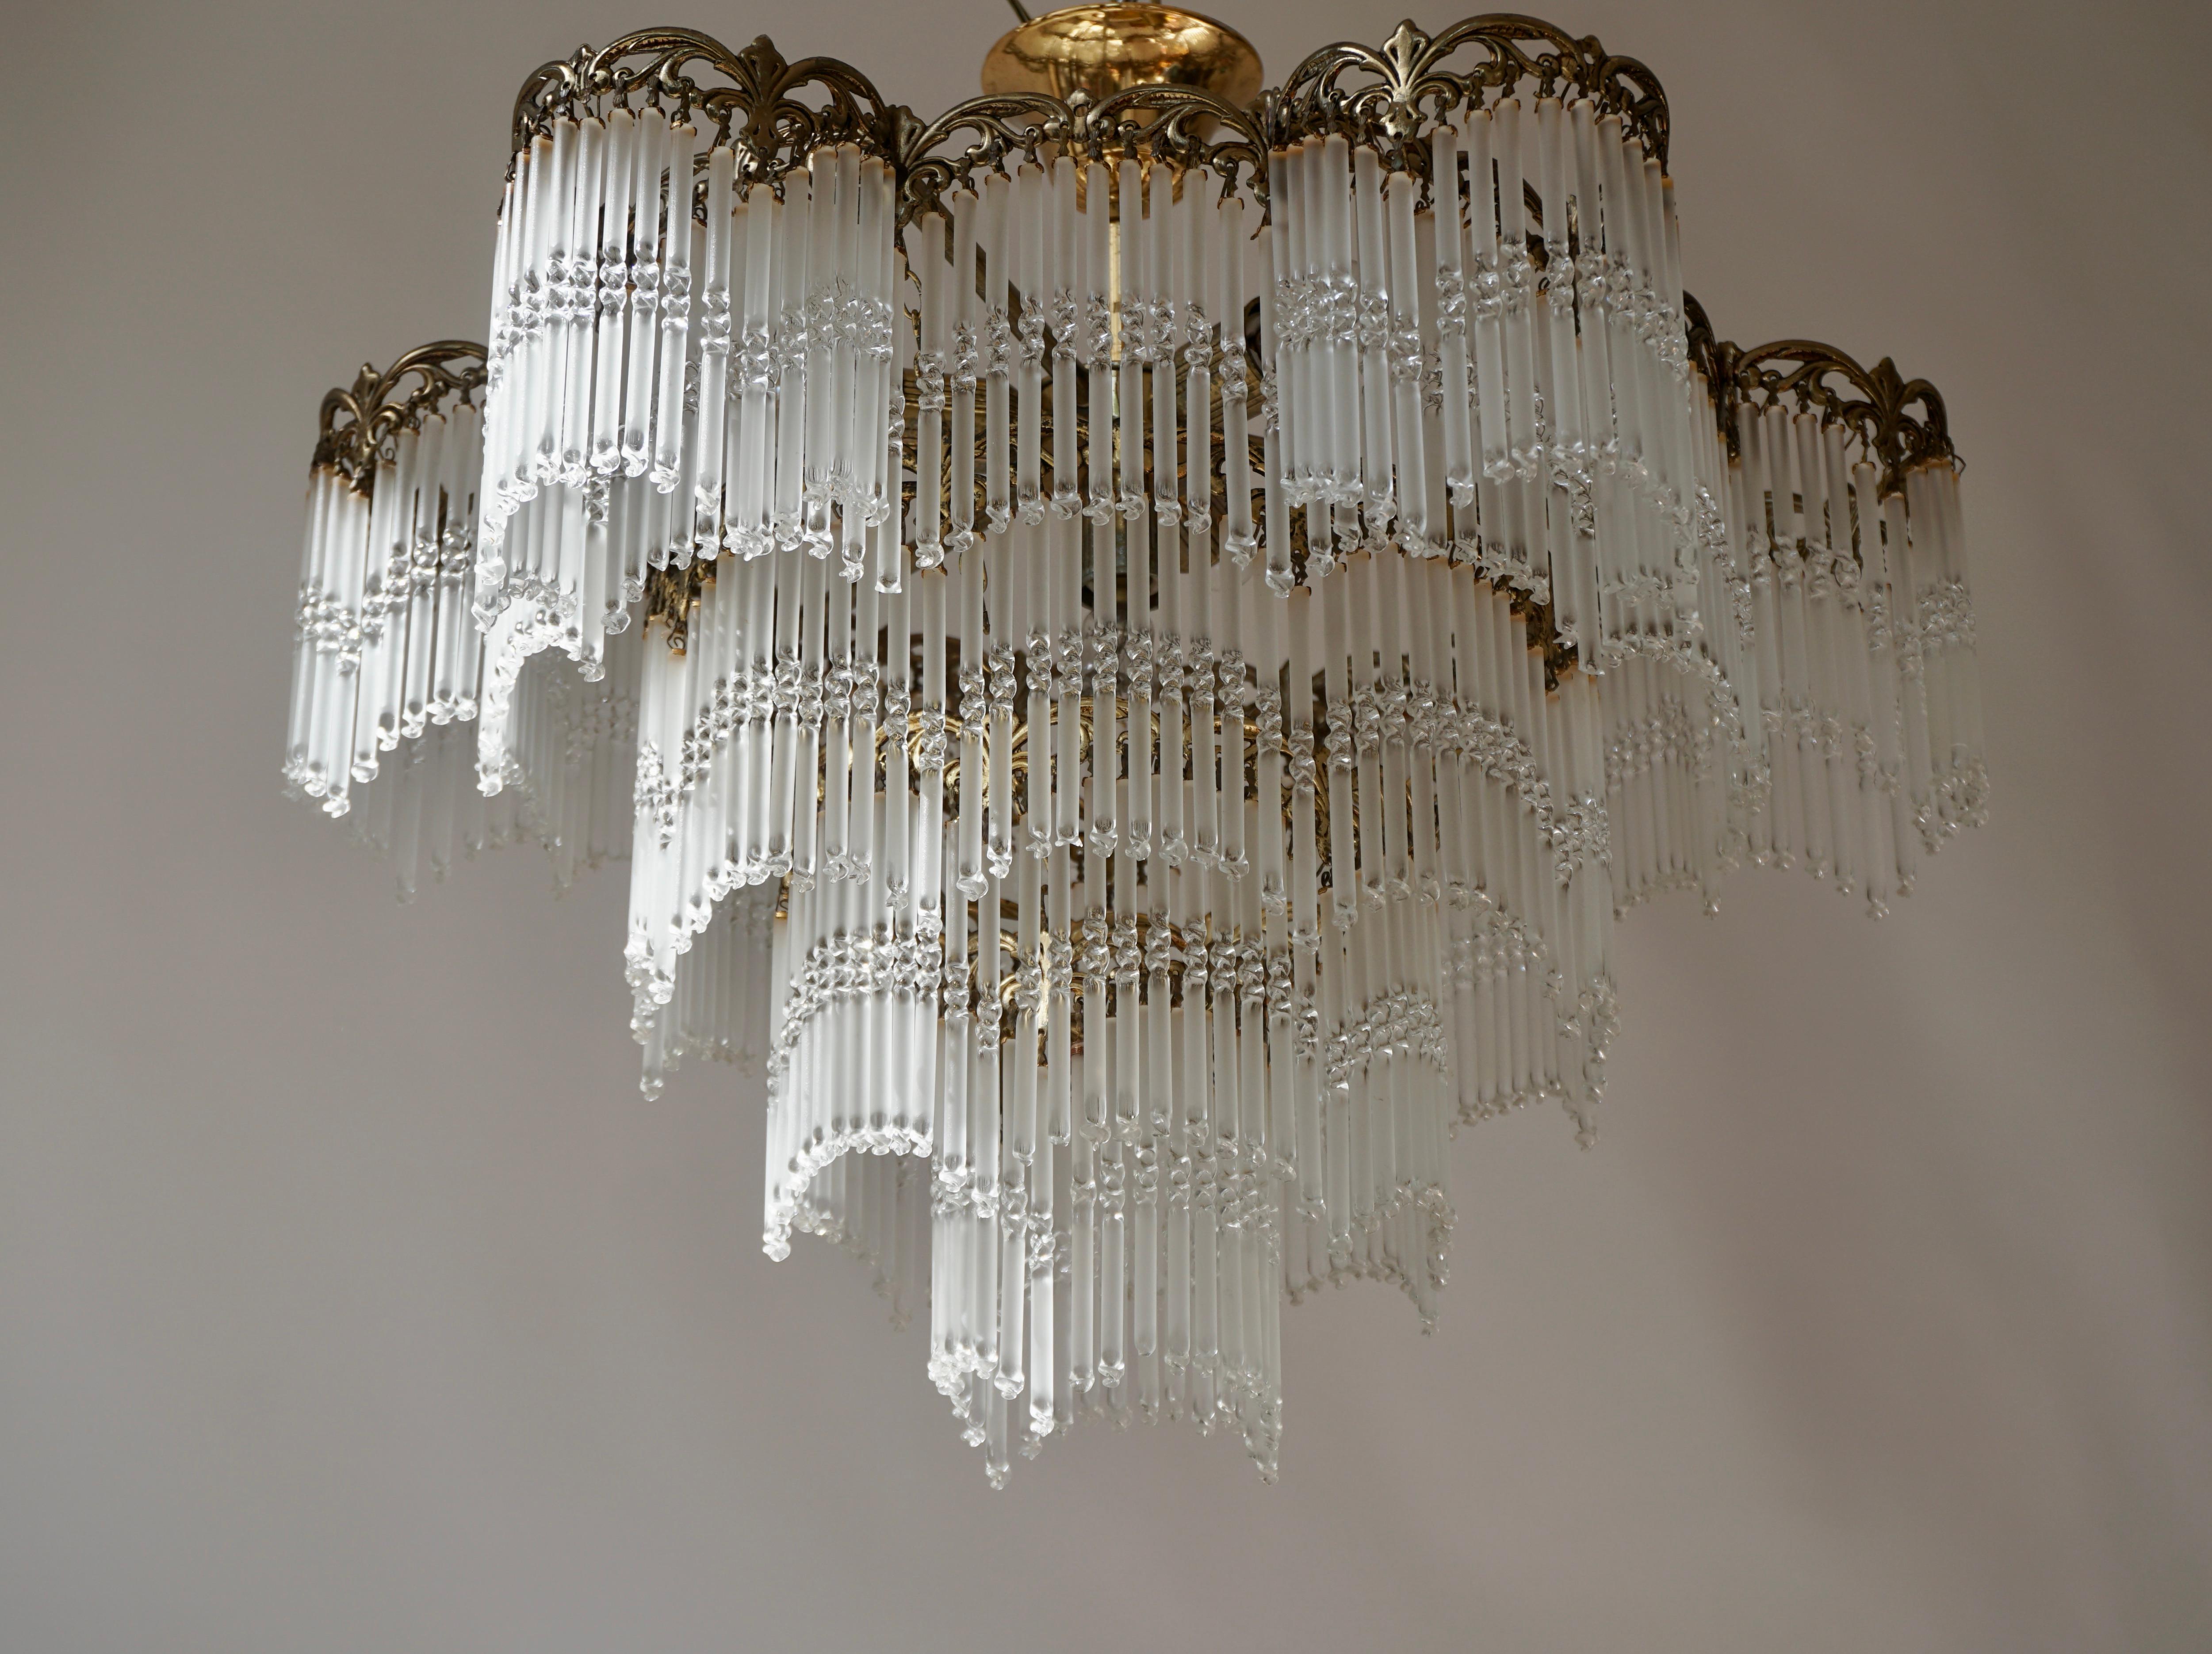 Italian Chandelier in Glass and Brass For Sale 3